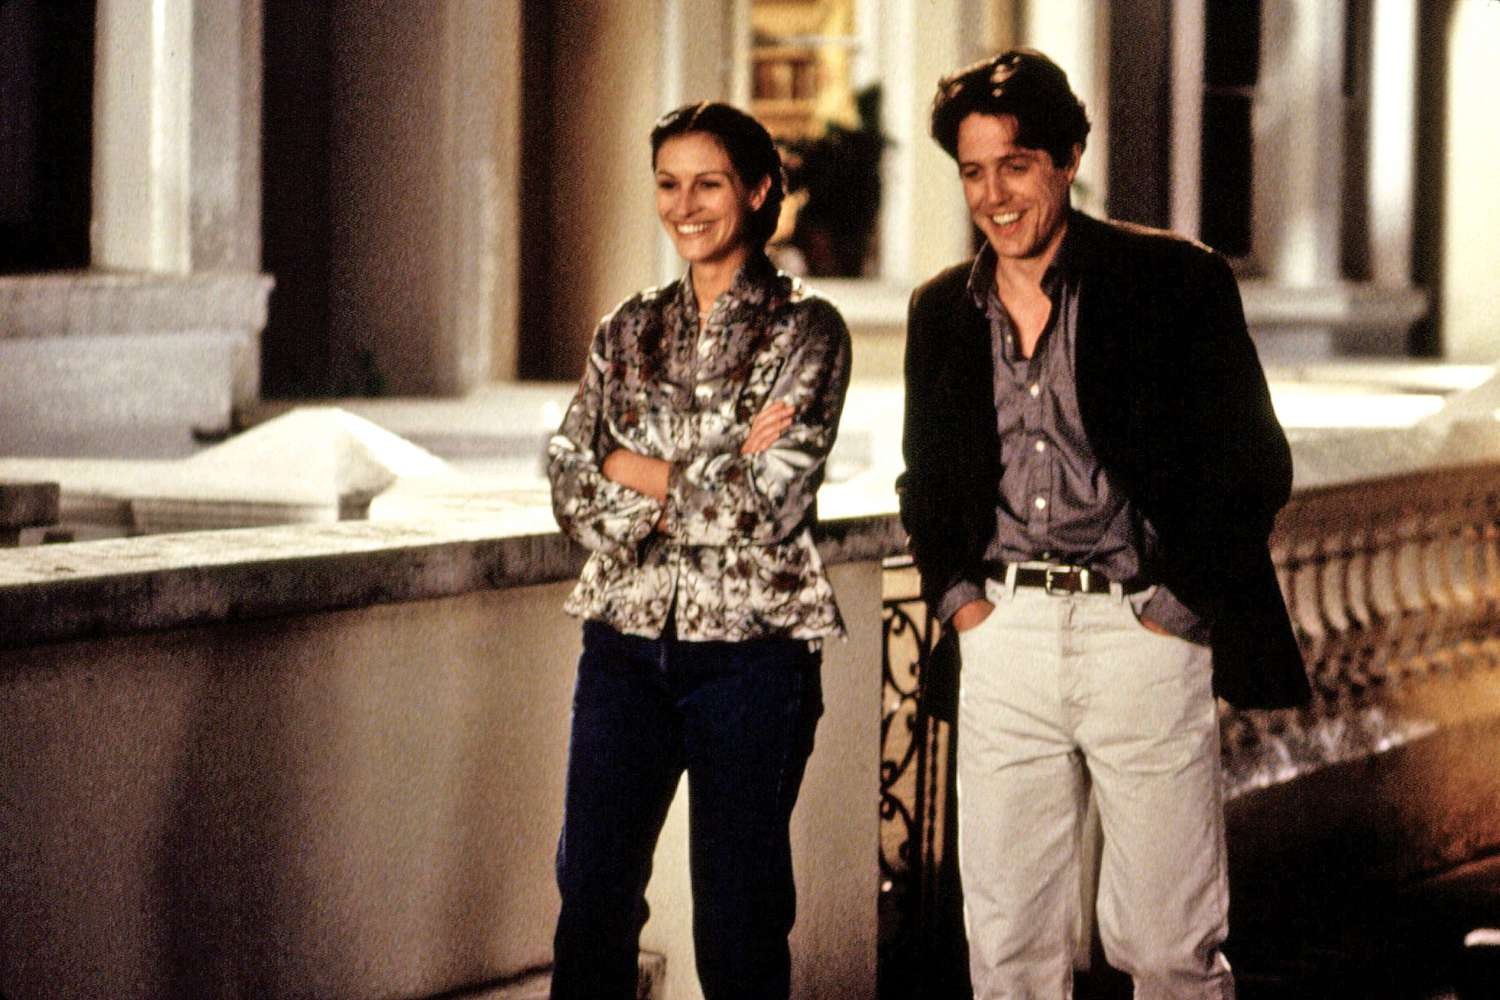 Audiences want the return of charming rom-coms like Notting Hill